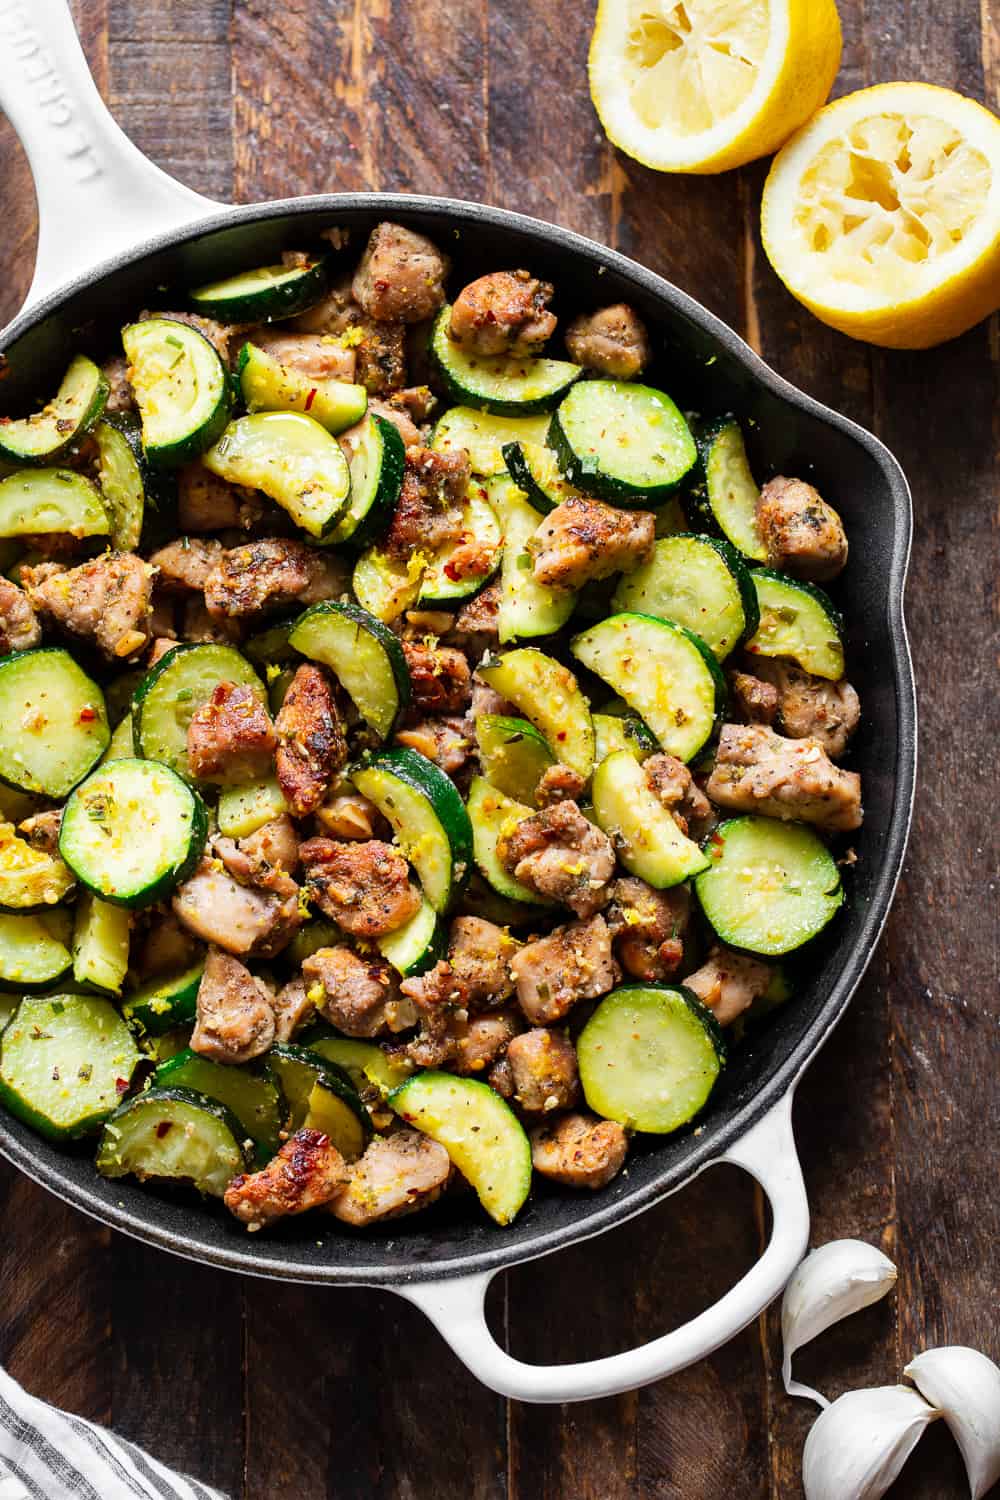 This Lemon Garlic Chicken Zucchini is packed with flavor, fast and easy for weeknights! Bite sized chicken thighs are perfectly seasoned and sautéed with zucchini and garlic then tossed with lemon juice and zest. Great alone or served over grain free noodles or cauliflower rice to keep it paleo, keto and Whole30. #paleo #whole30 #keto #cleaneating 